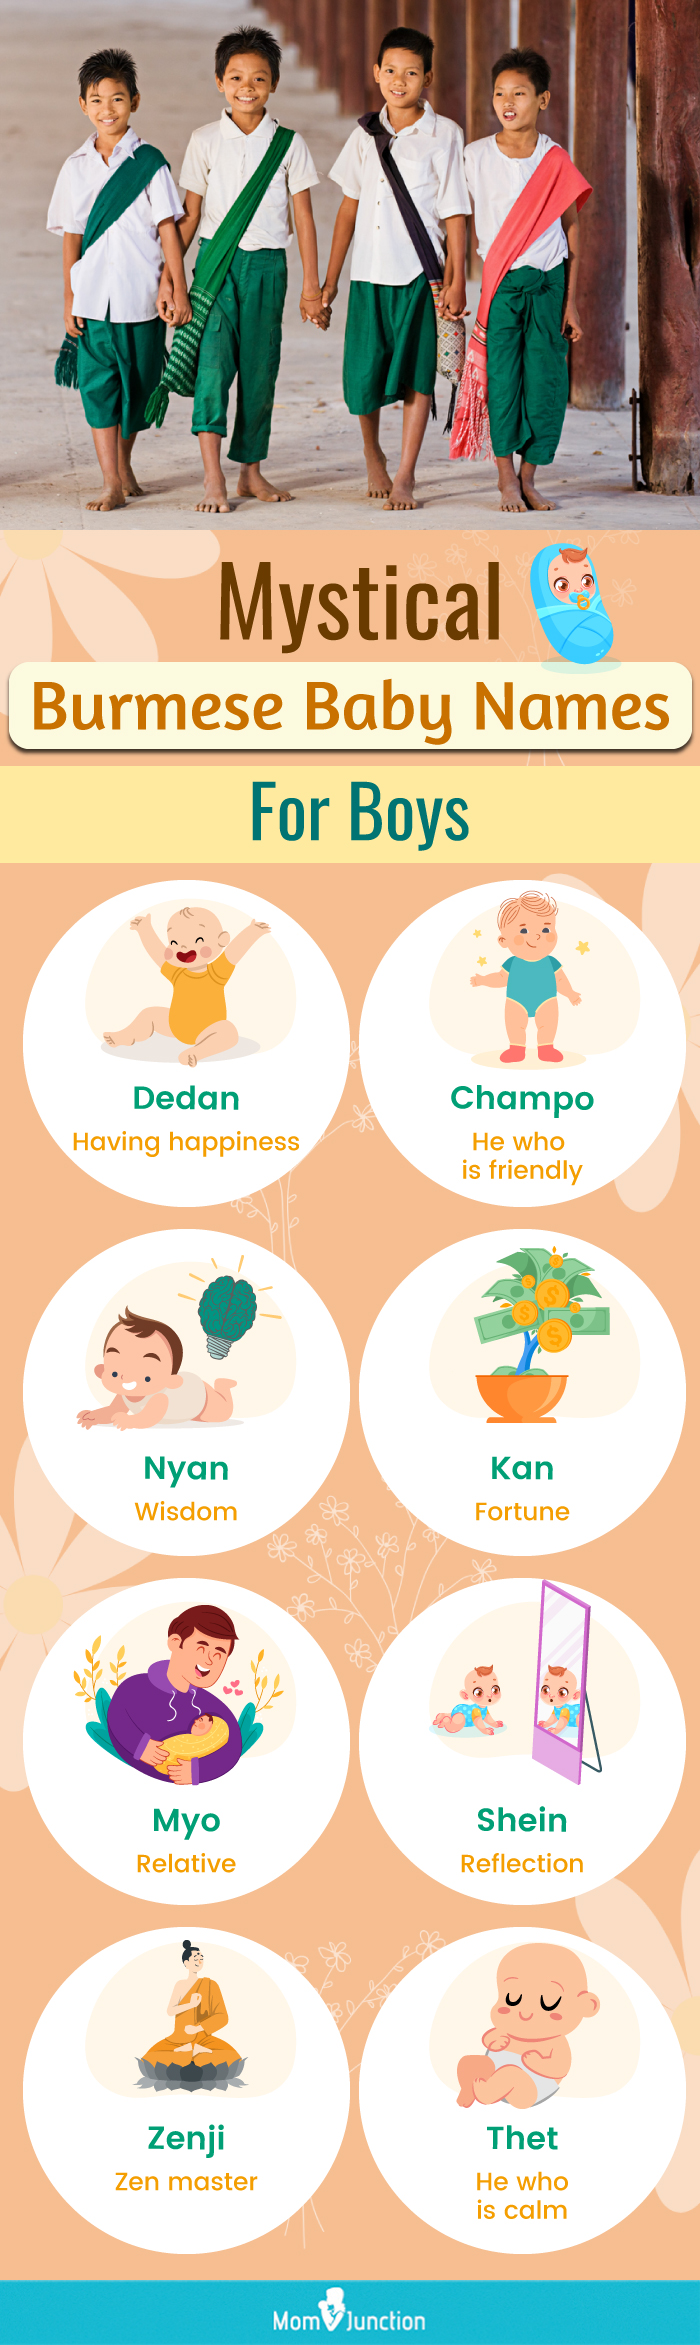 mystical burmese baby names for boys (infographic)